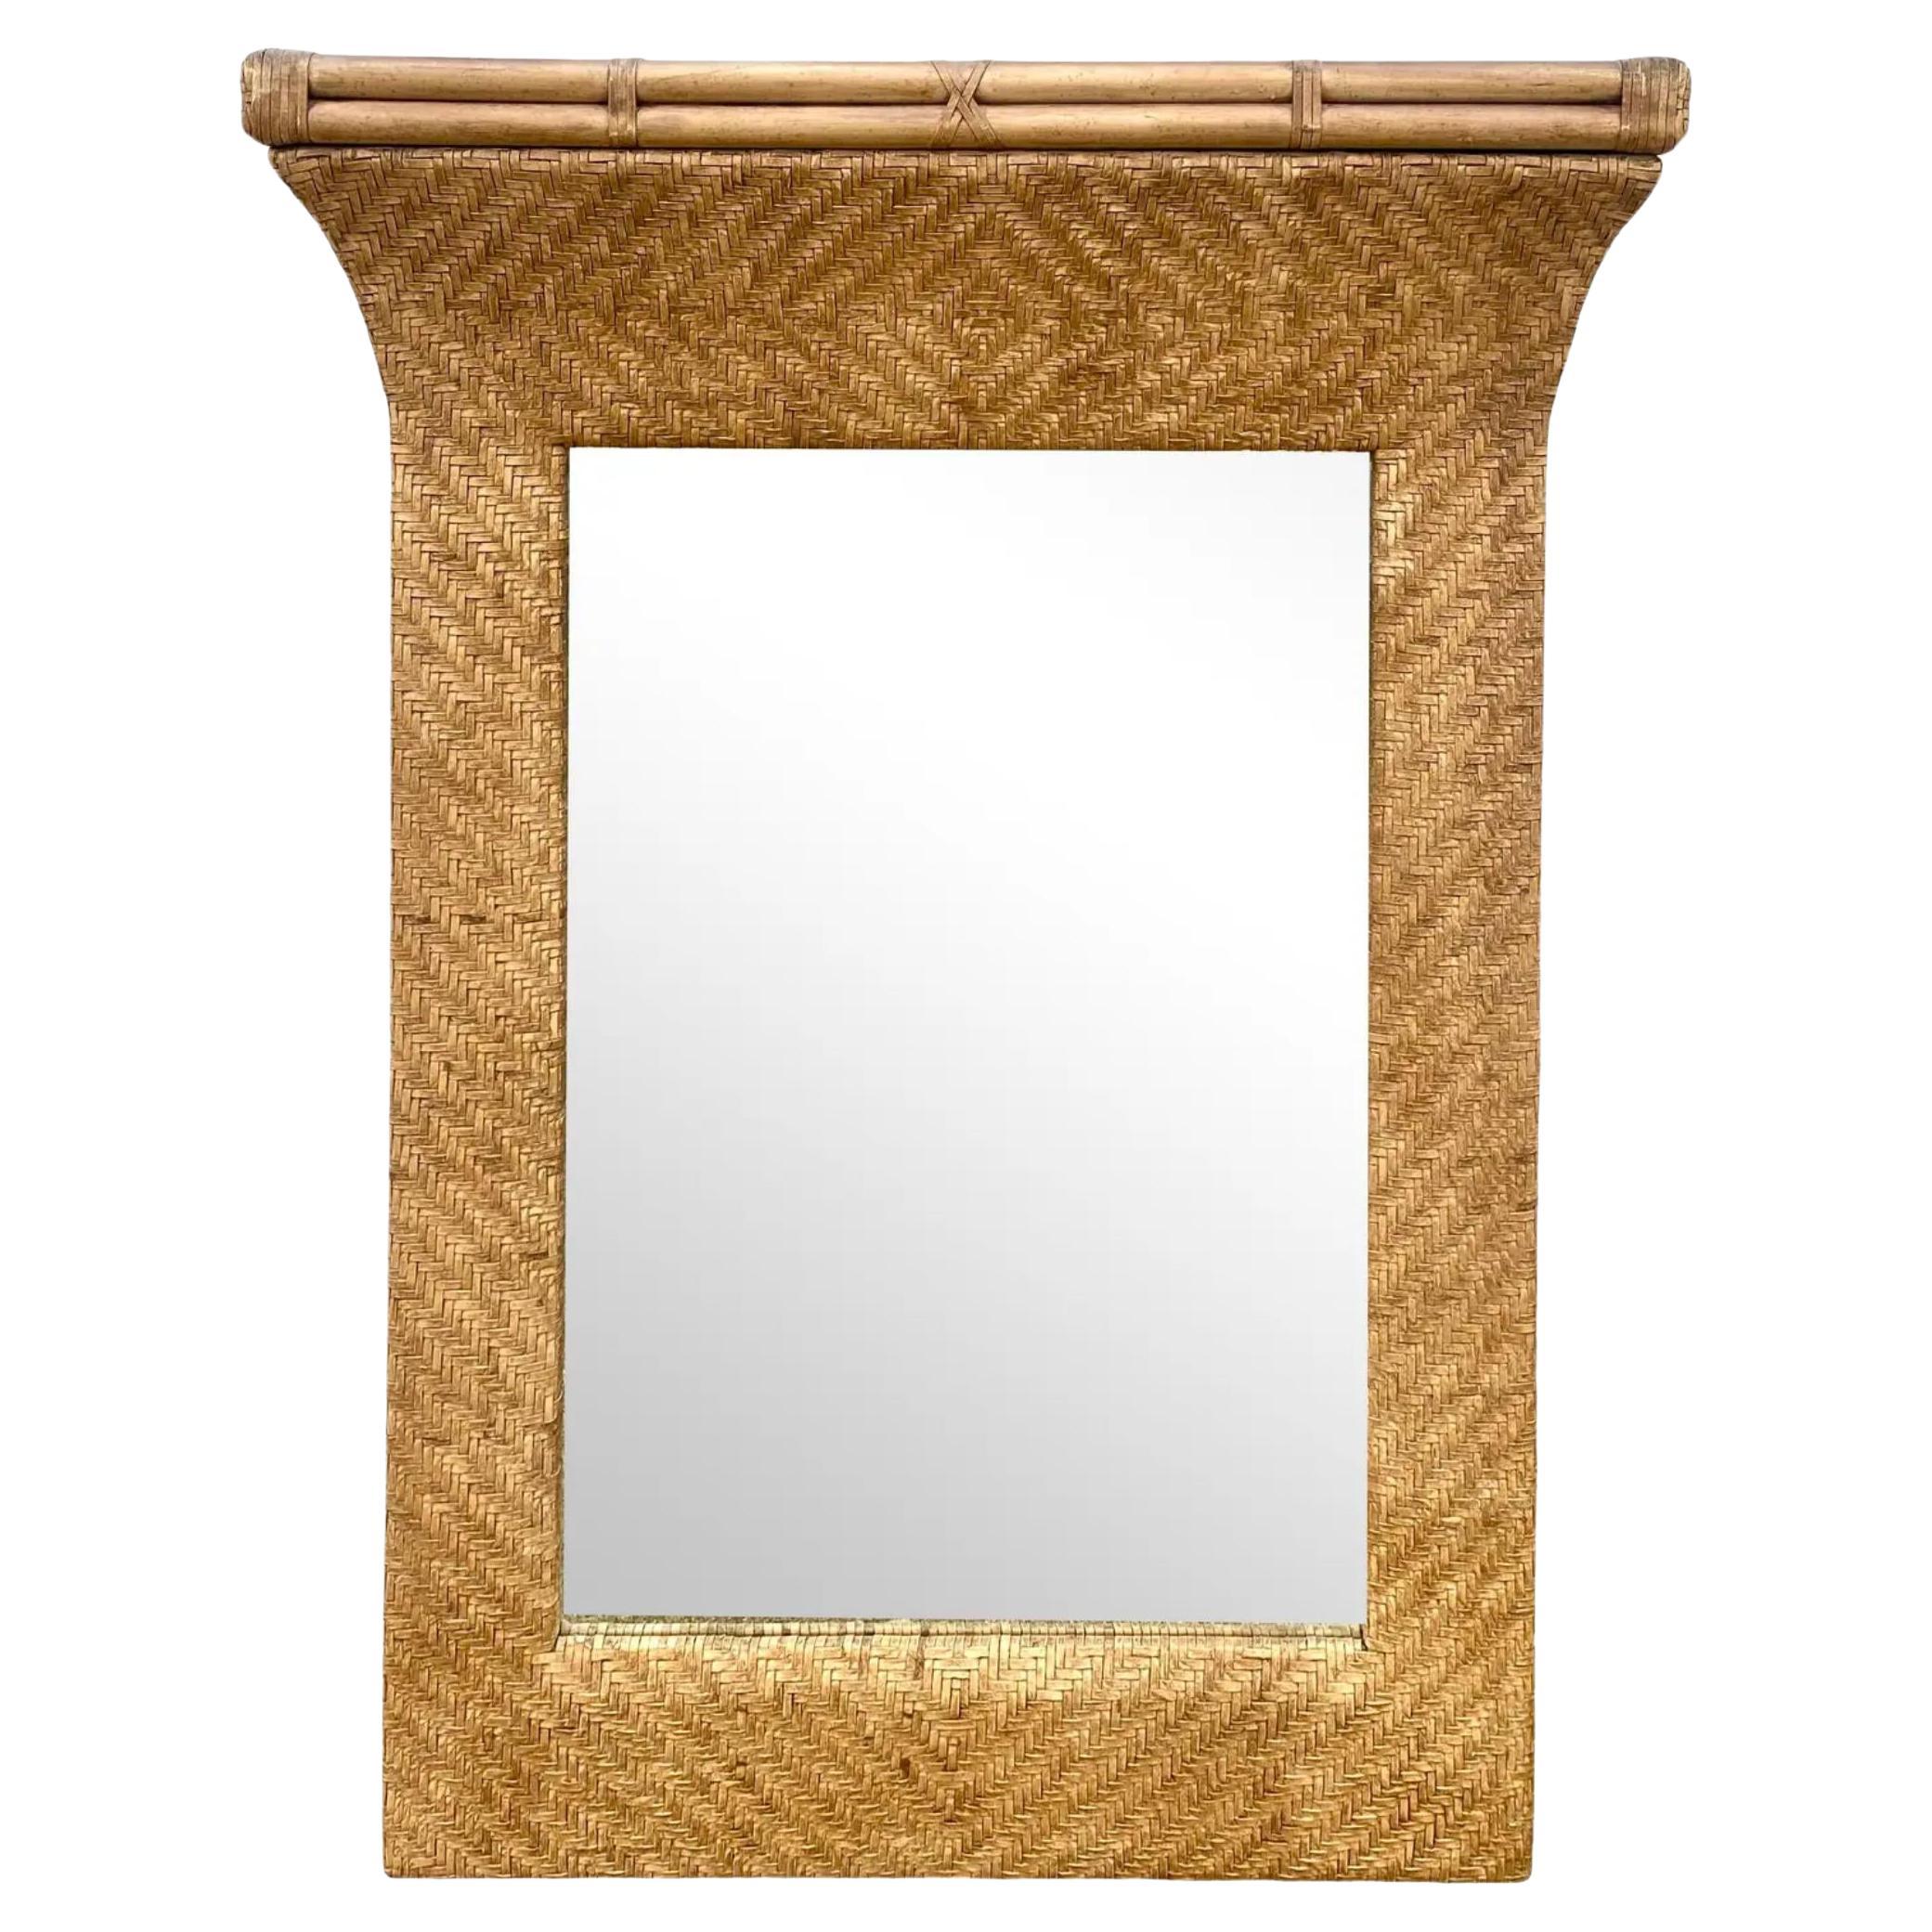 Vintage Coastal Henredon Woven Leather and Bamboo Mirror For Sale